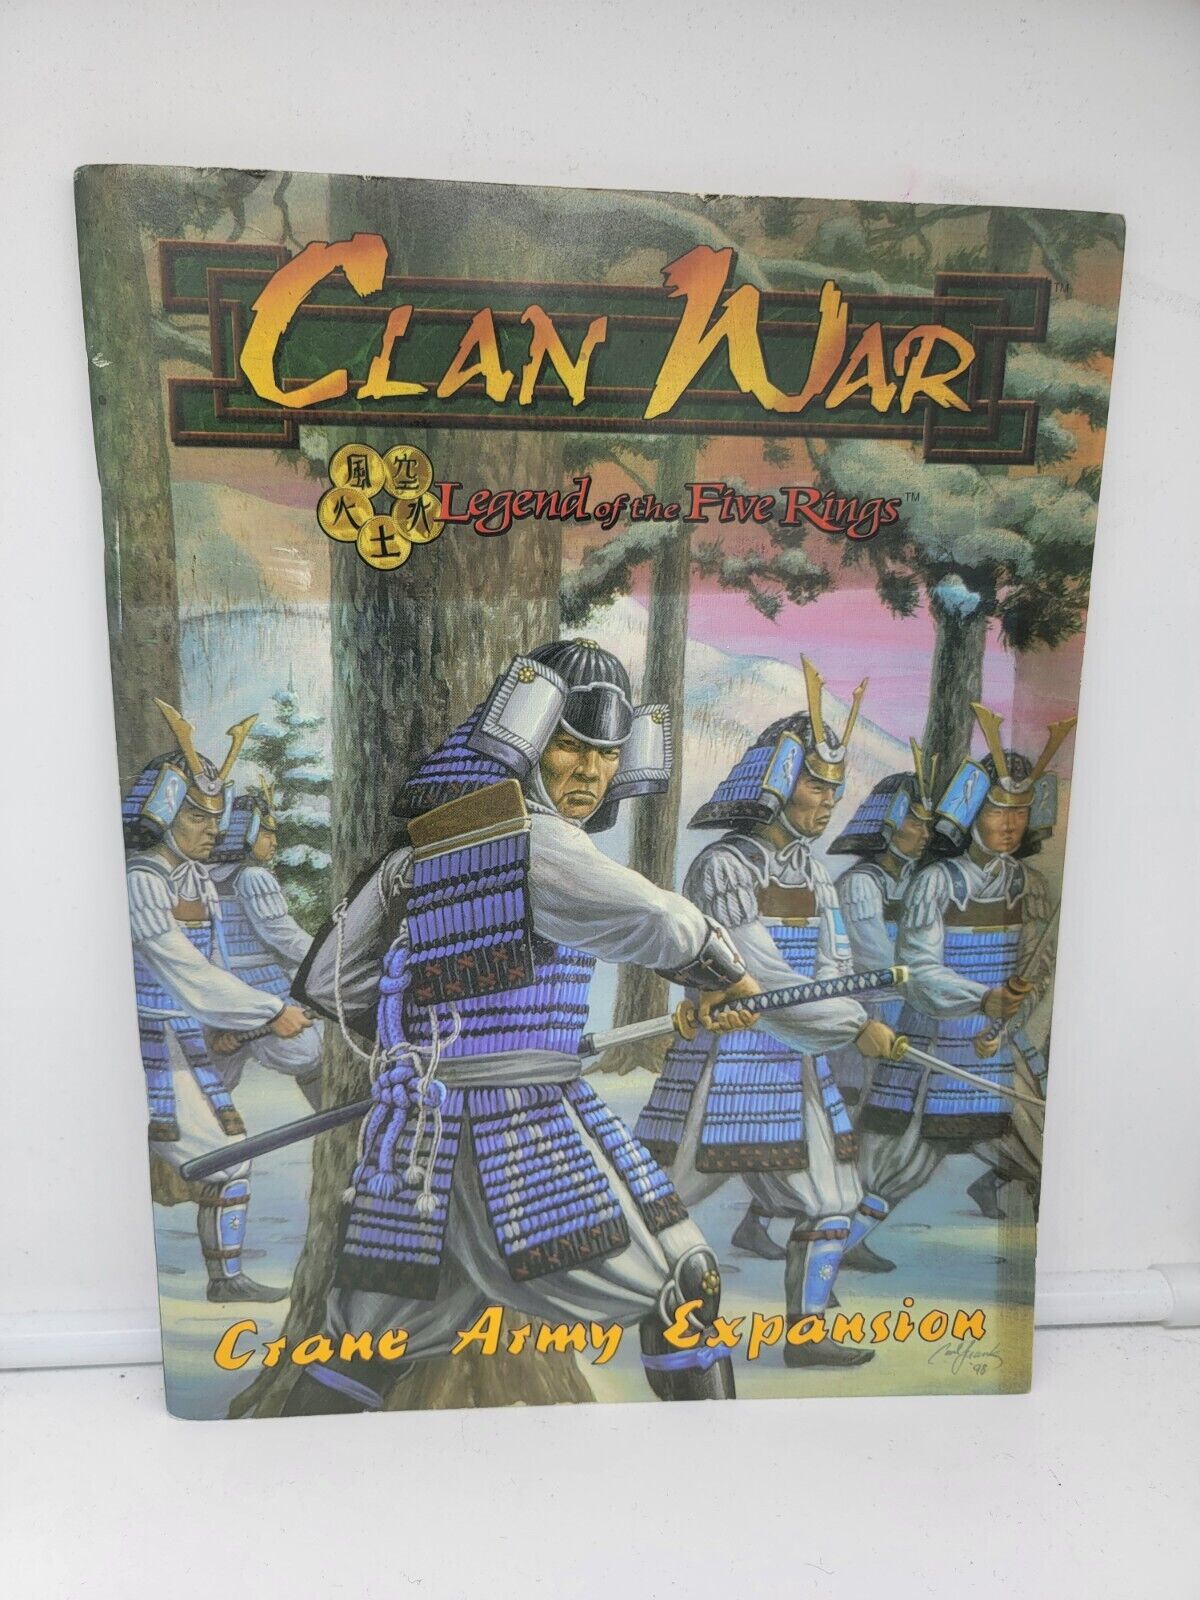 L5r Clan War Crane Army Expansion Book - 12-006-1 - 1998 - Wizards Of The Coast